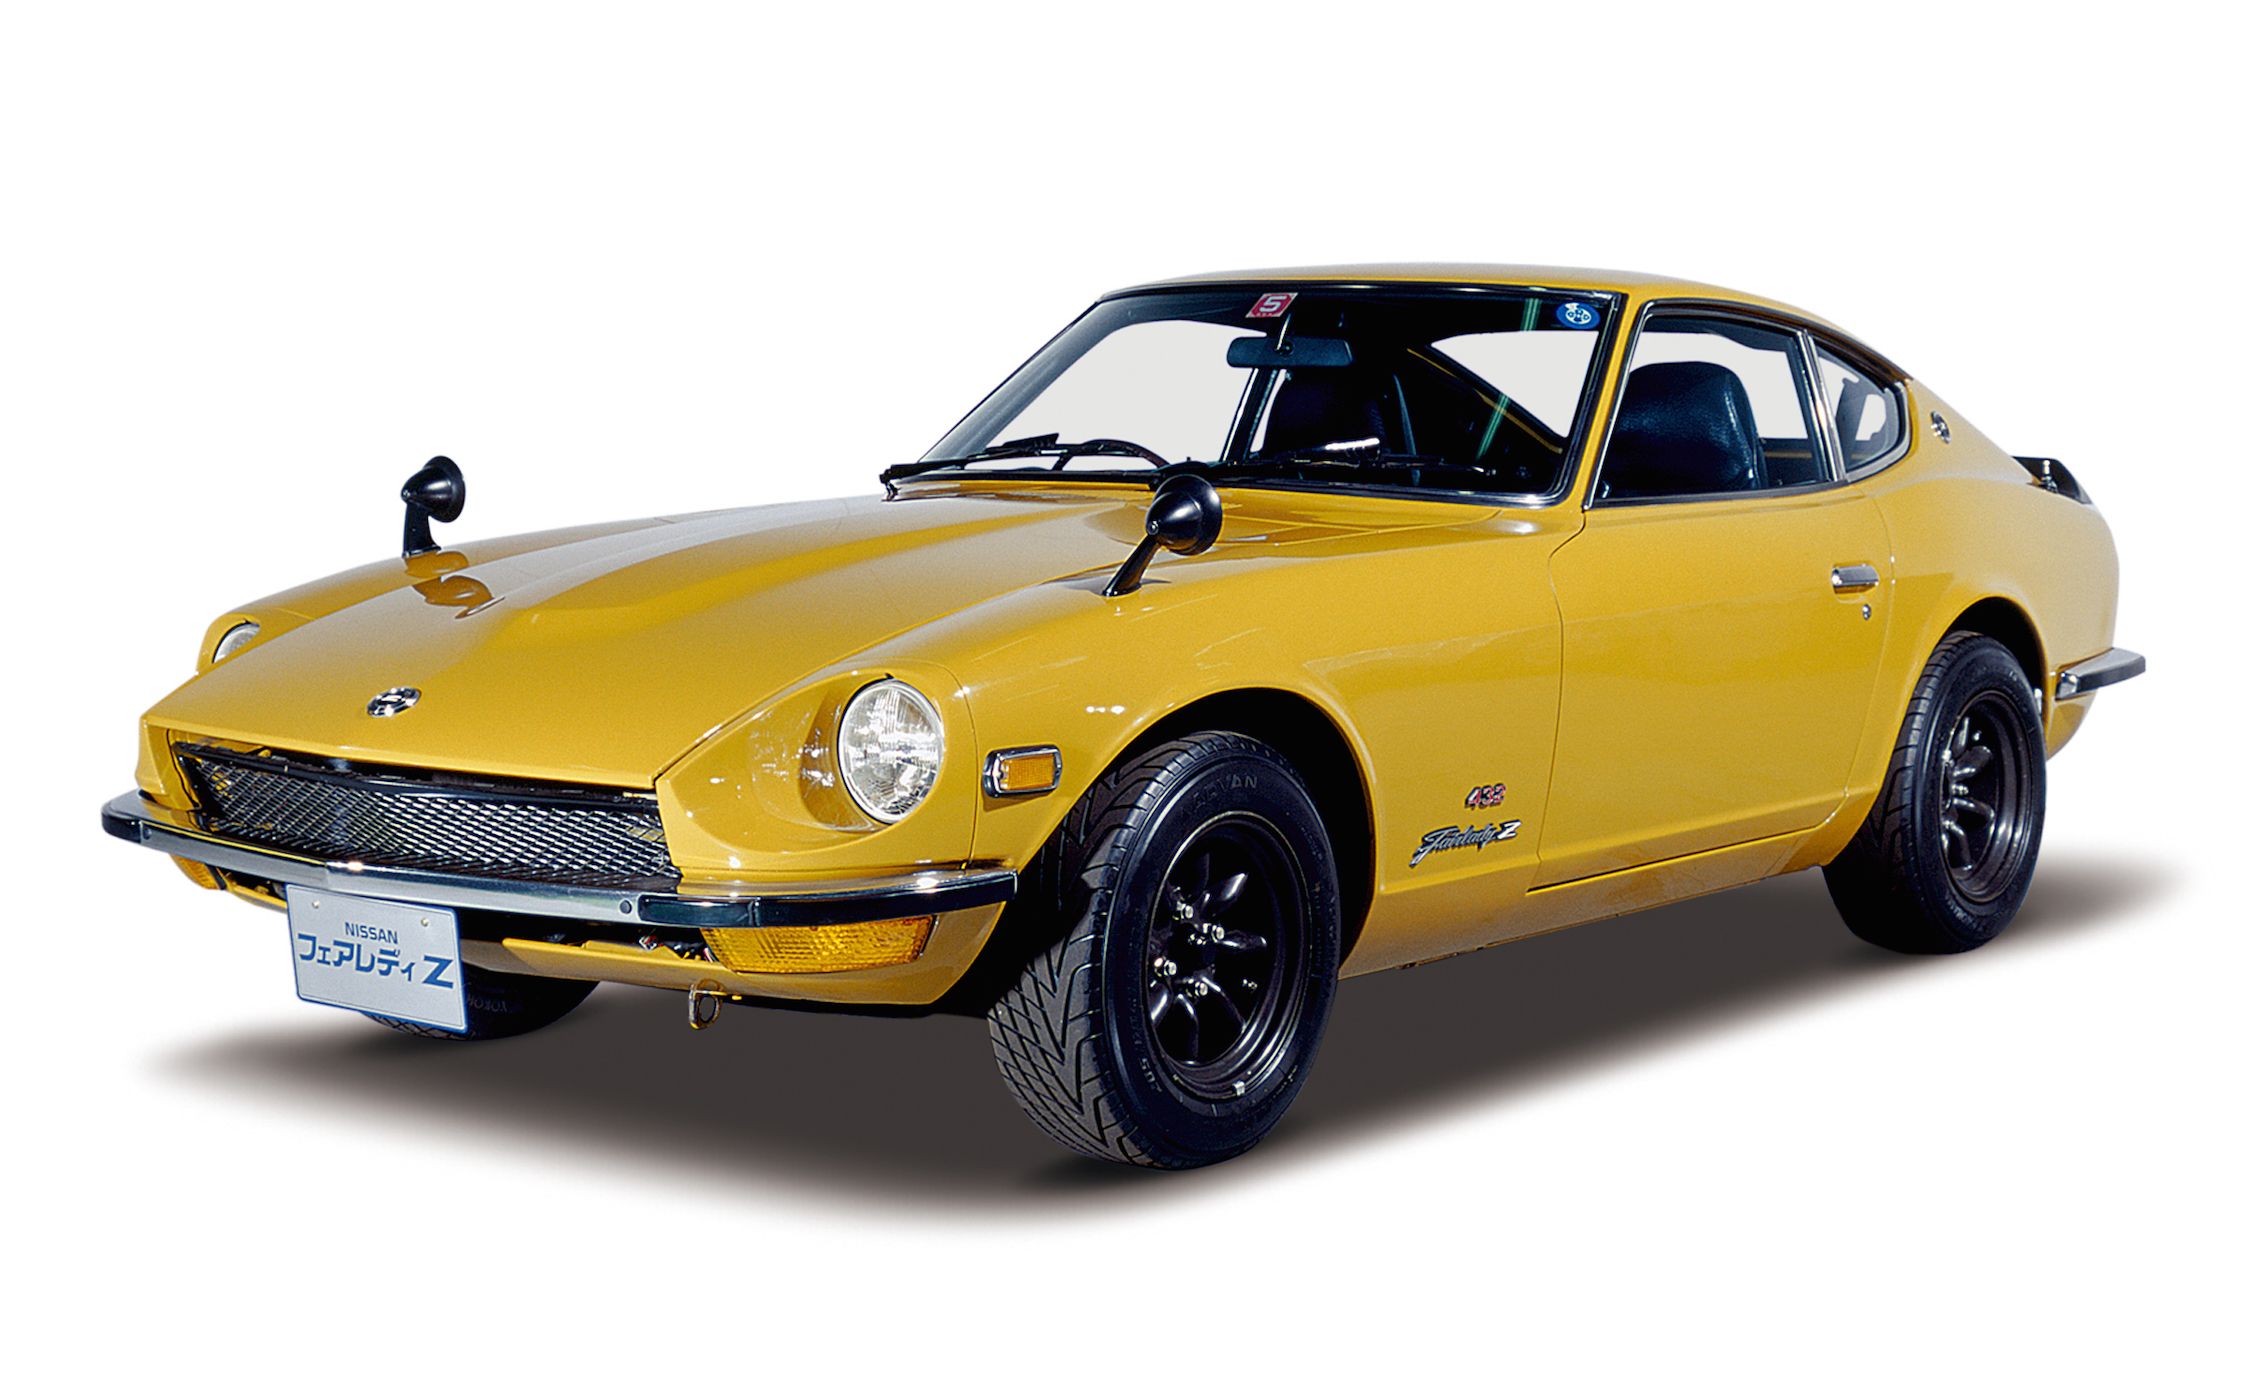 A Visual History Of The Nissan Z